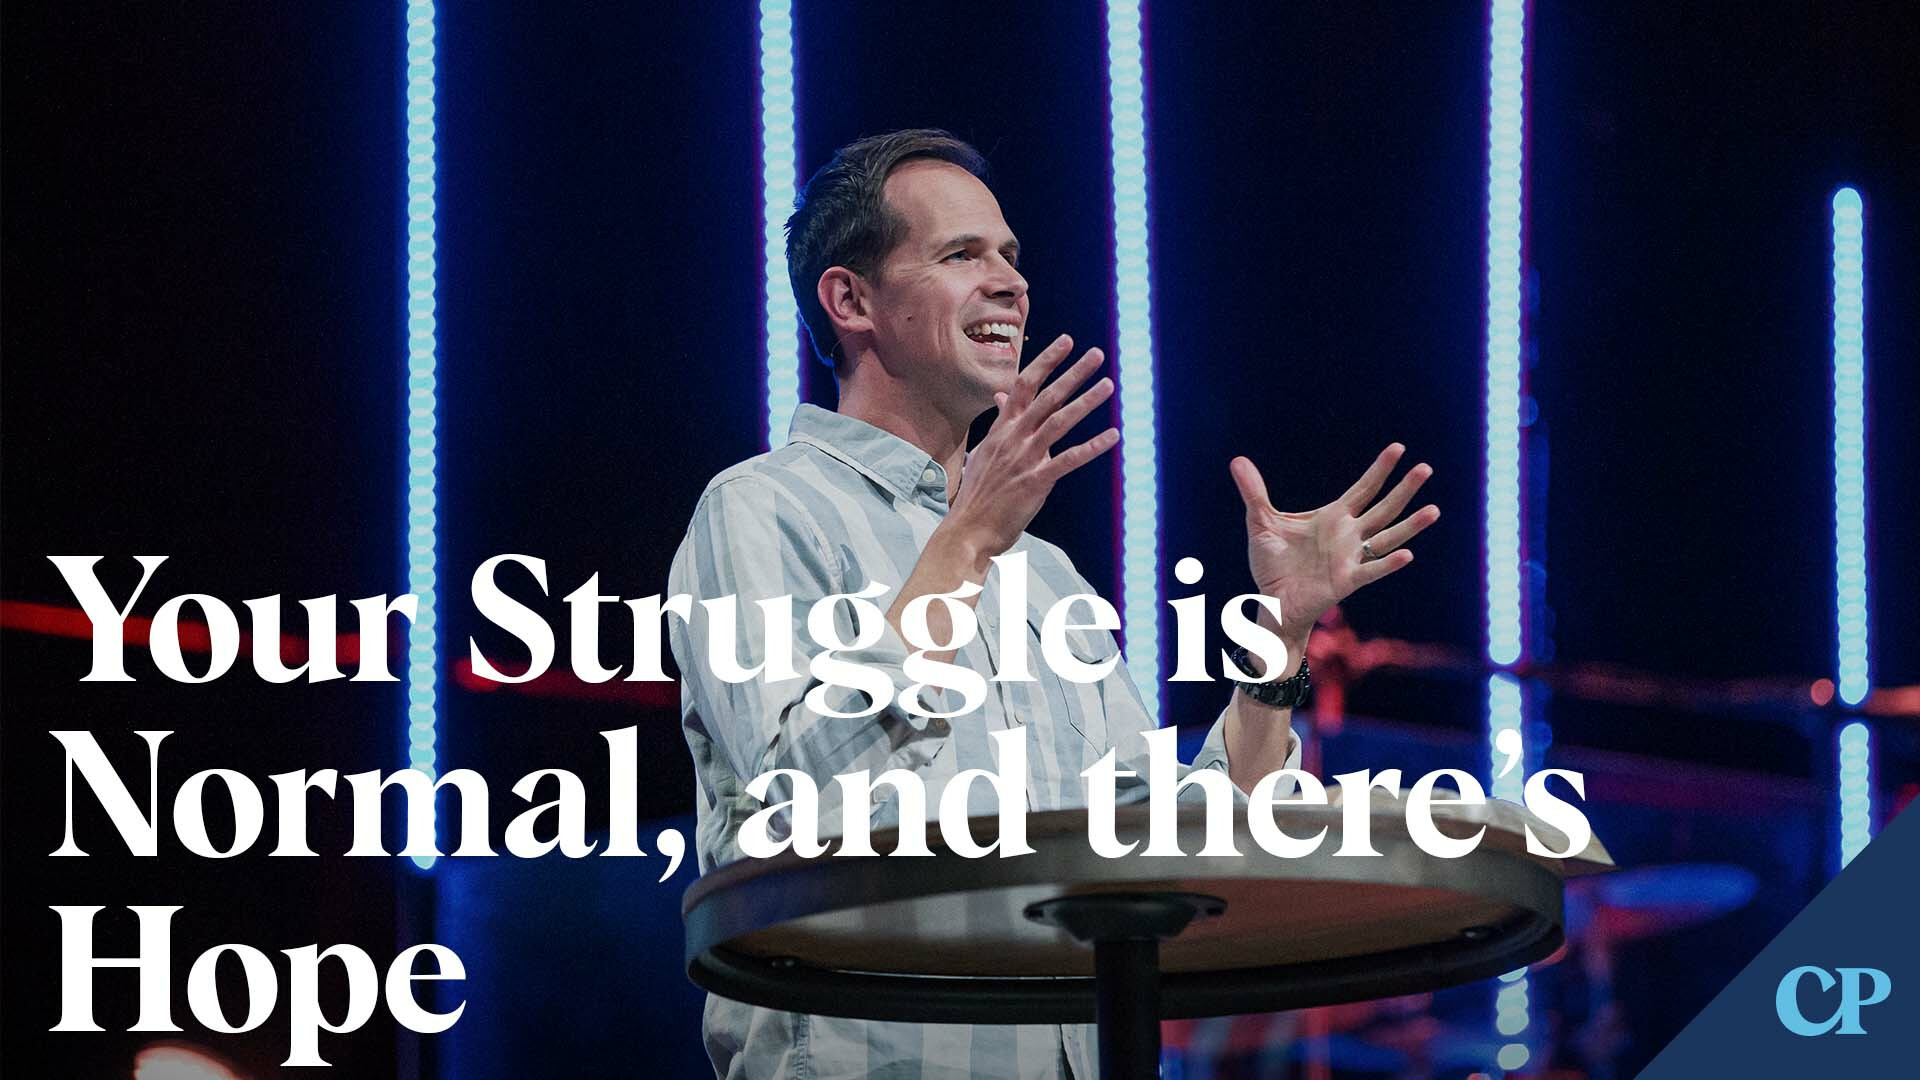 Your Struggle is Normal, and there’s Hope